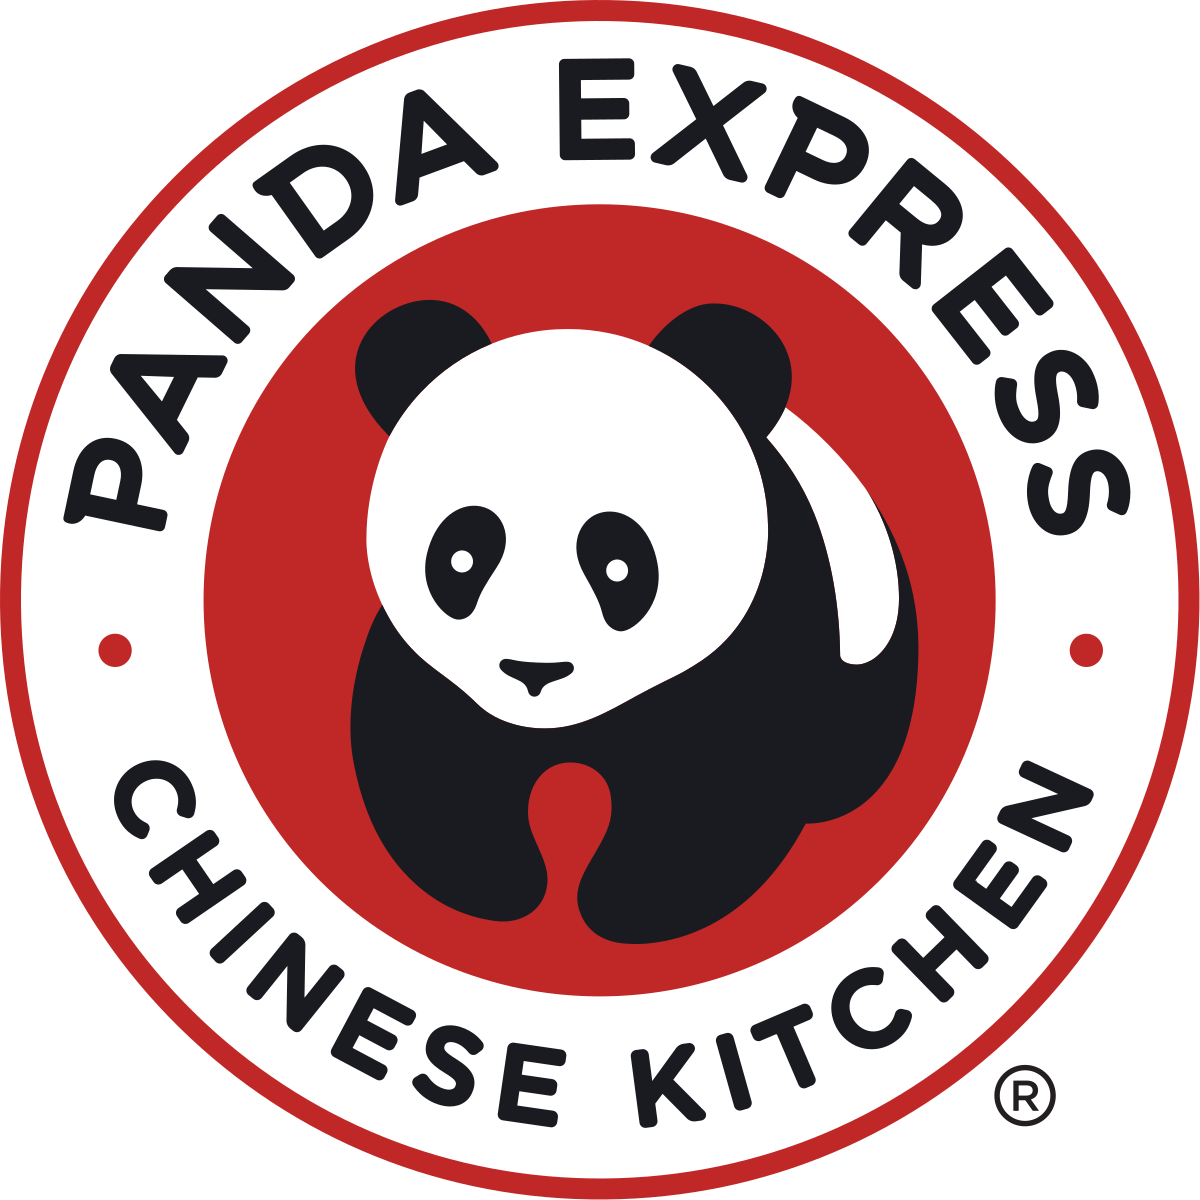 Wilmington Chamber of Commerce hosts Ribbon-Cutting Ceremony for Panda Express